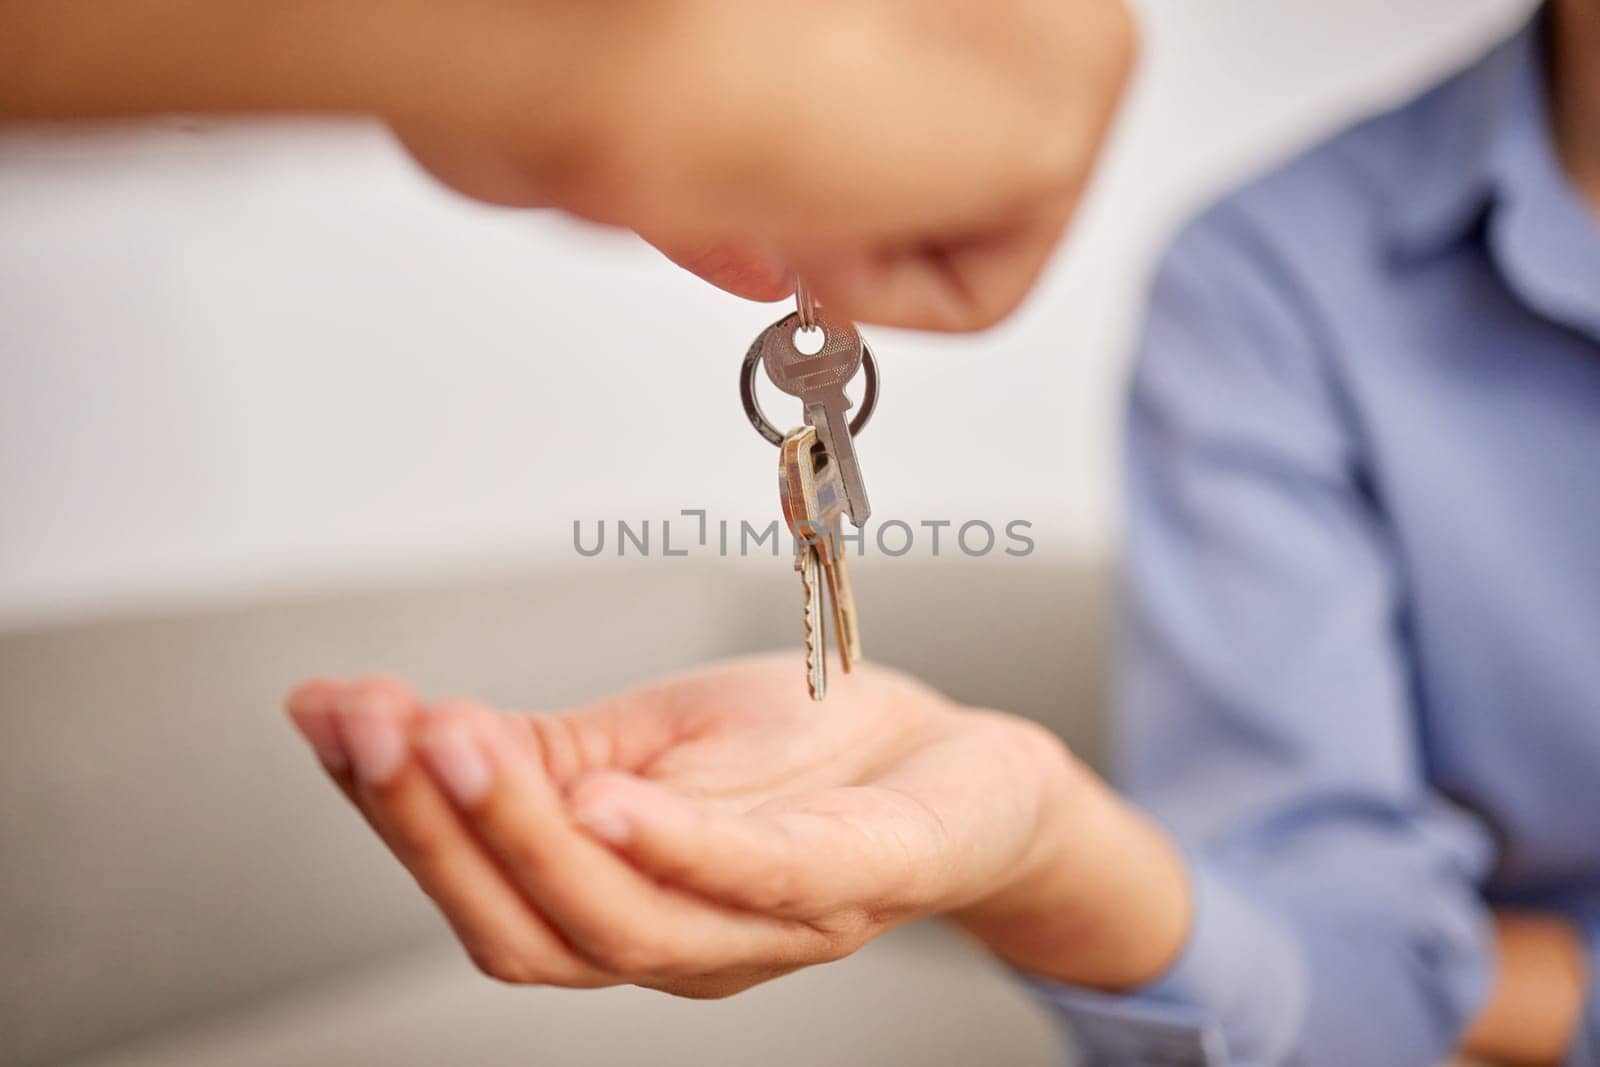 Hands, real estate and giving keys to customer after moving into new home. Property agent, realtor and handing over key to owner for sale, loan or mortgage investment in apartment, house or rent